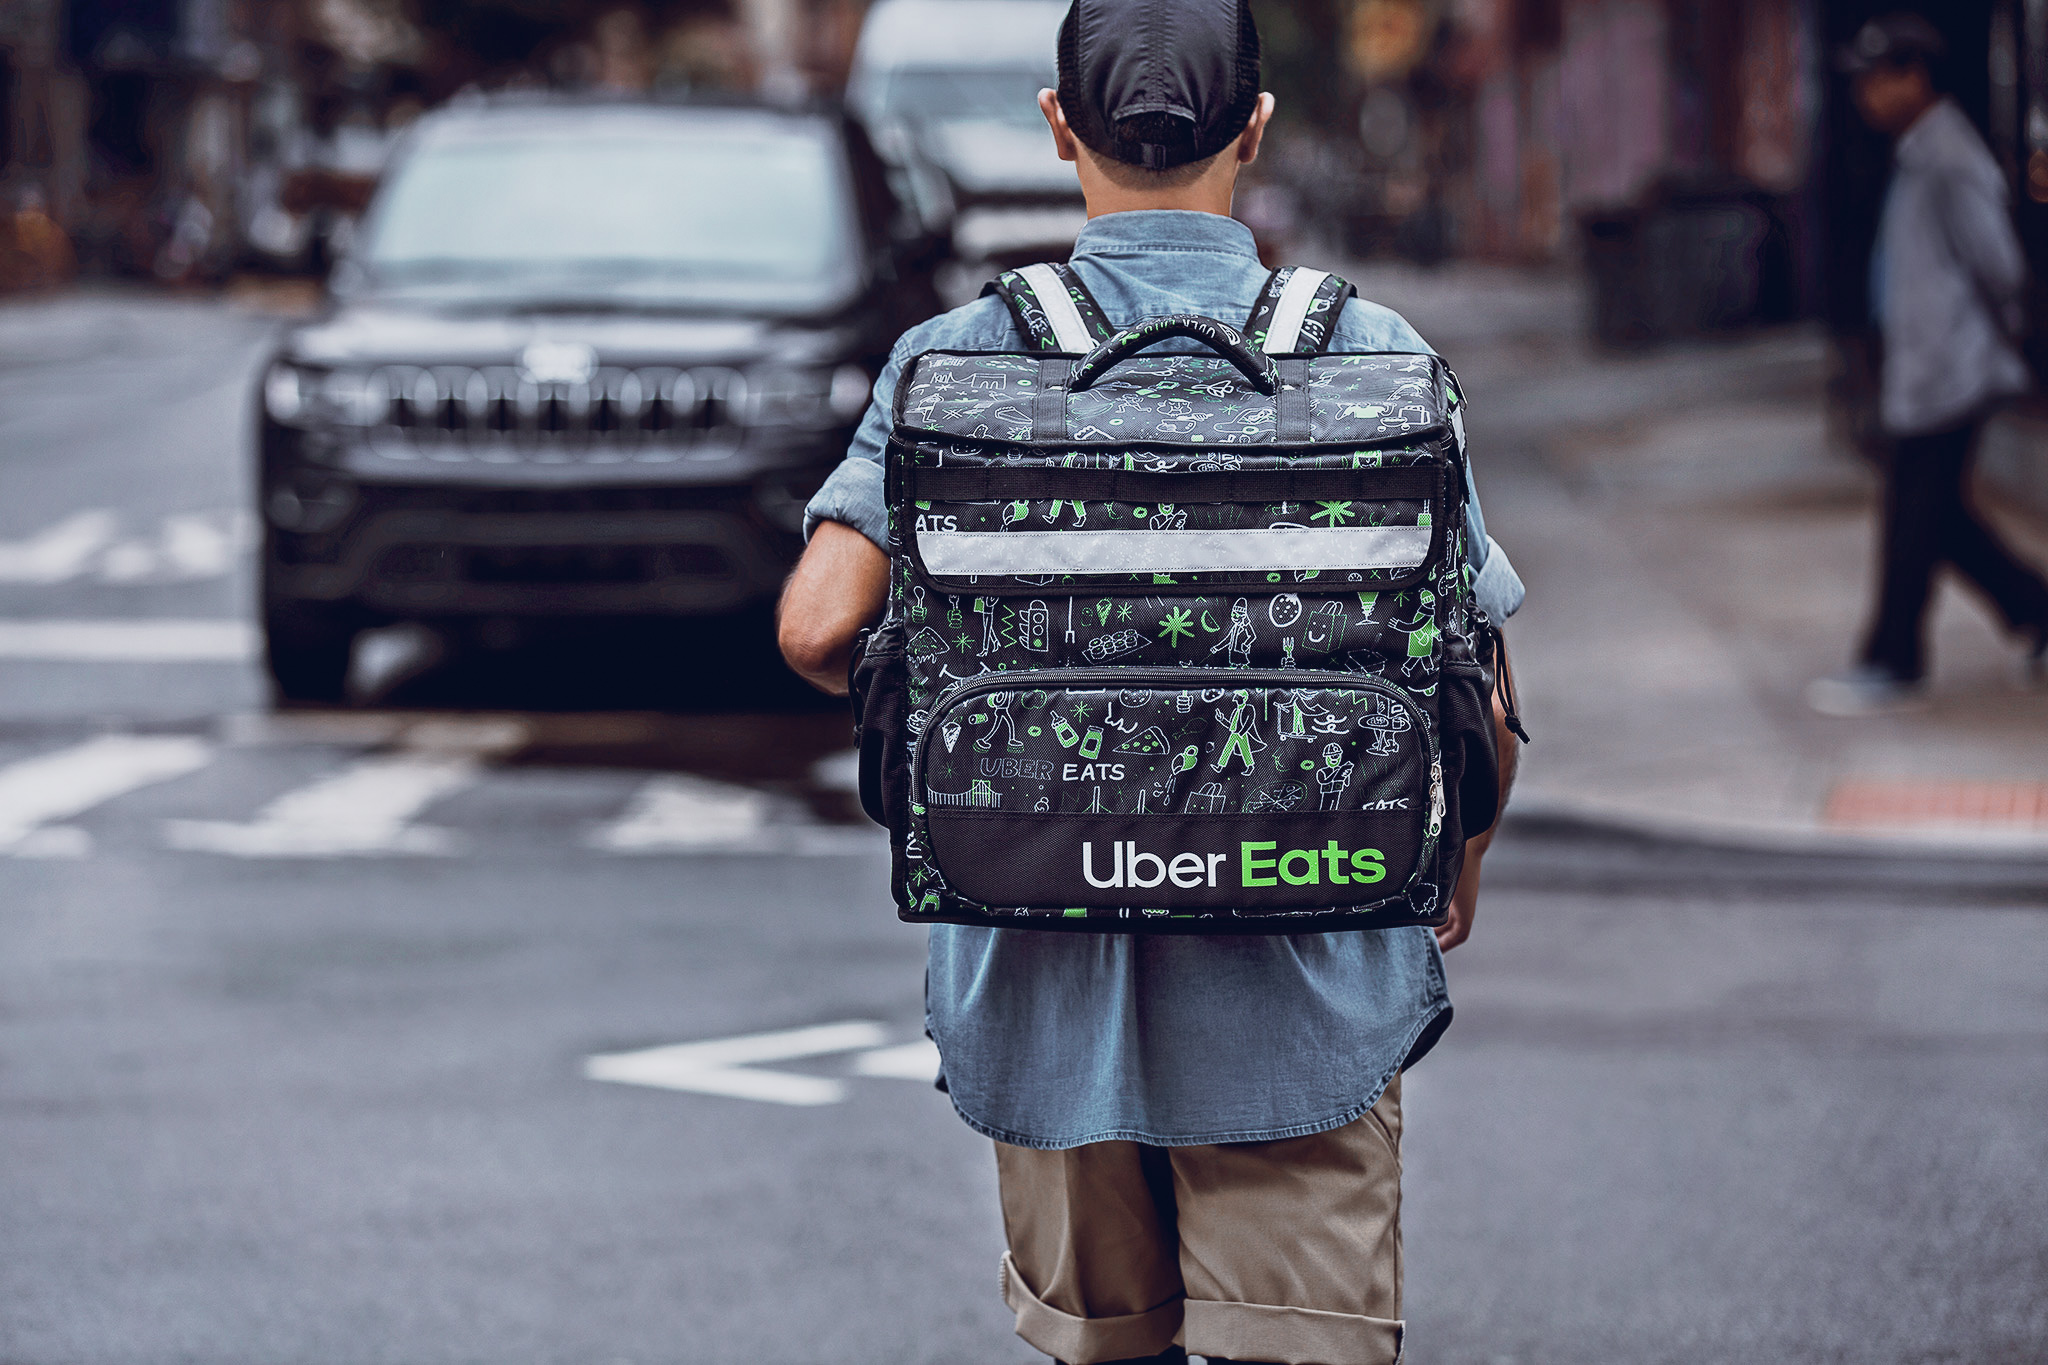 Starbucks - Place one order via UberEats and receive a free $10 UberEats gift card